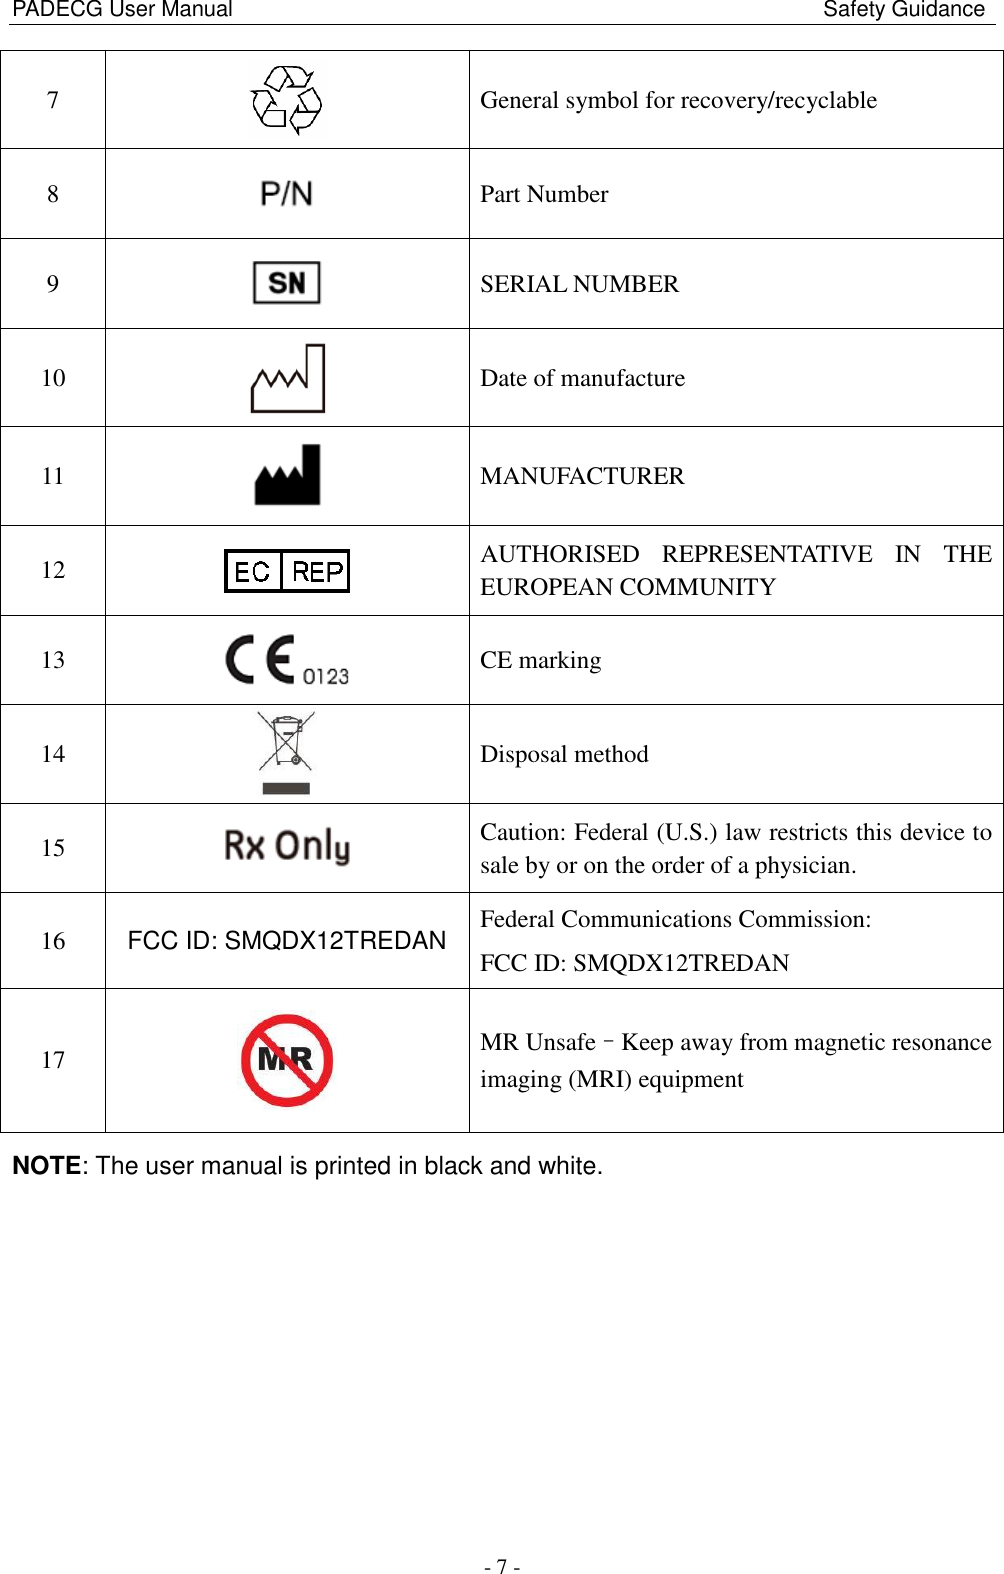 PADECG User Manual                                                                                                            Safety Guidance - 7 - 7  General symbol for recovery/recyclable 8 Part Number 9 SERIAL NUMBER 10  Date of manufacture 11  MANUFACTURER 12  AUTHORISED  REPRESENTATIVE  IN  THE EUROPEAN COMMUNITY 13  CE marking 14  Disposal method 15  Caution: Federal (U.S.) law restricts this device to sale by or on the order of a physician. 16 FCC ID: SMQDX12TREDAN Federal Communications Commission:   FCC ID: SMQDX12TREDAN 17  MR Unsafe–Keep away from magnetic resonance imaging (MRI) equipment NOTE: The user manual is printed in black and white. 